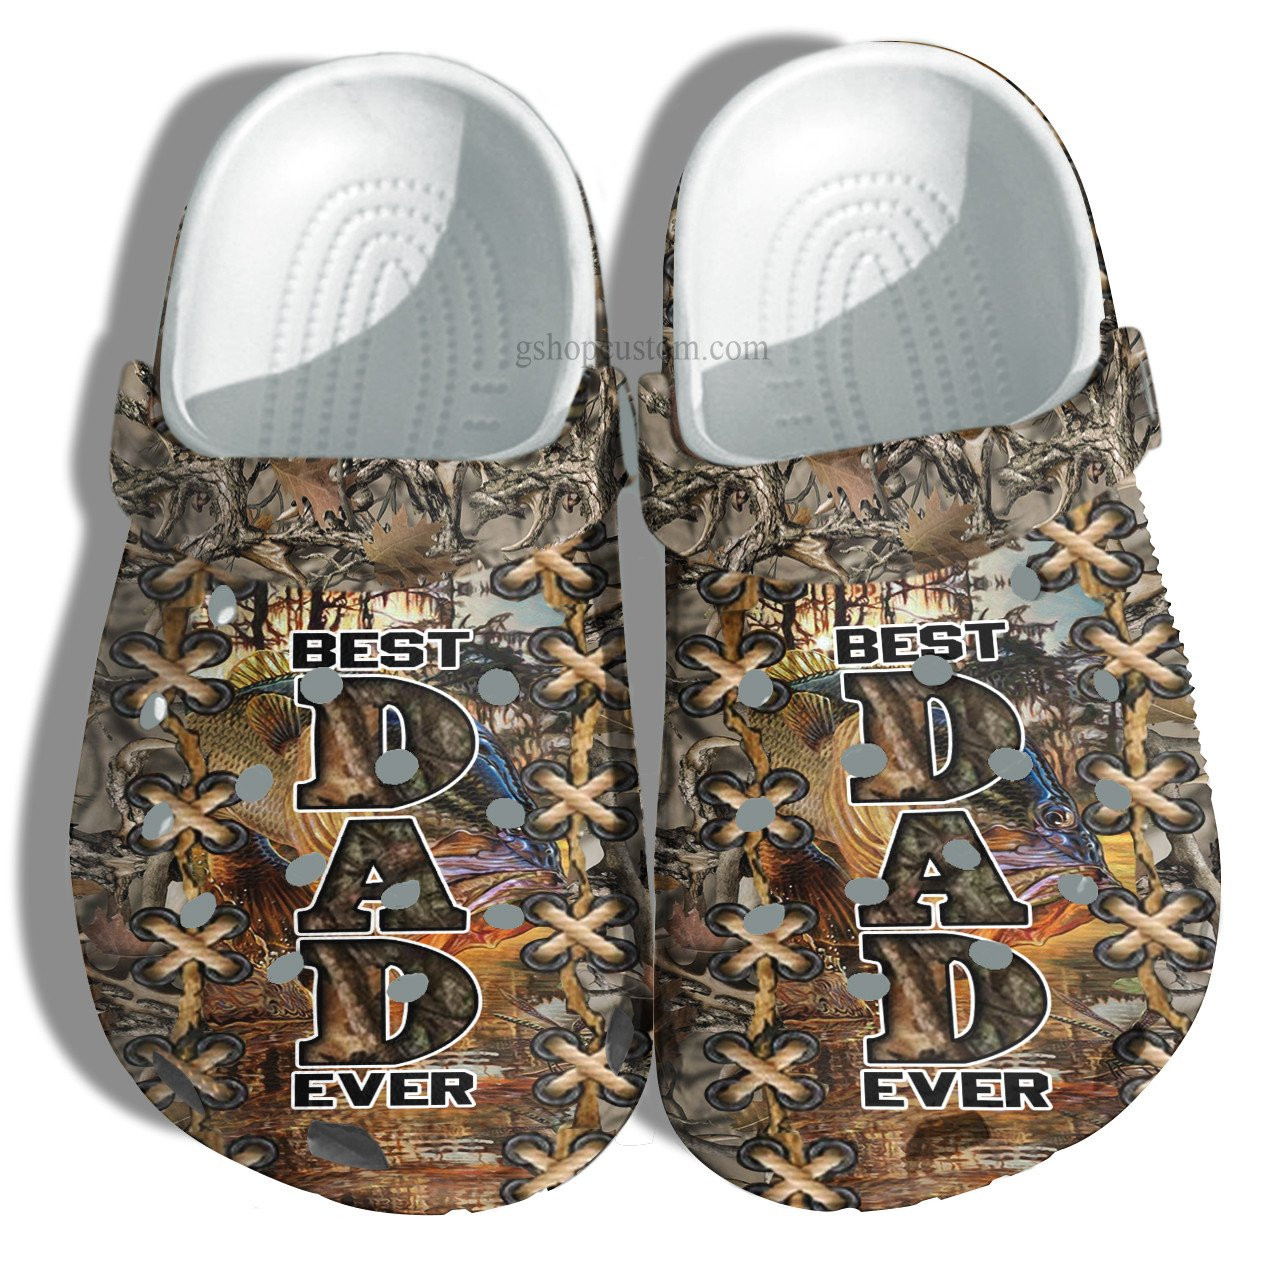 Best Dad Ever Fishing Camouflage Croc Crocs Clog Shoes Gift Men Father Day- Fishing Camo Army Crocs Clog Shoes For Son